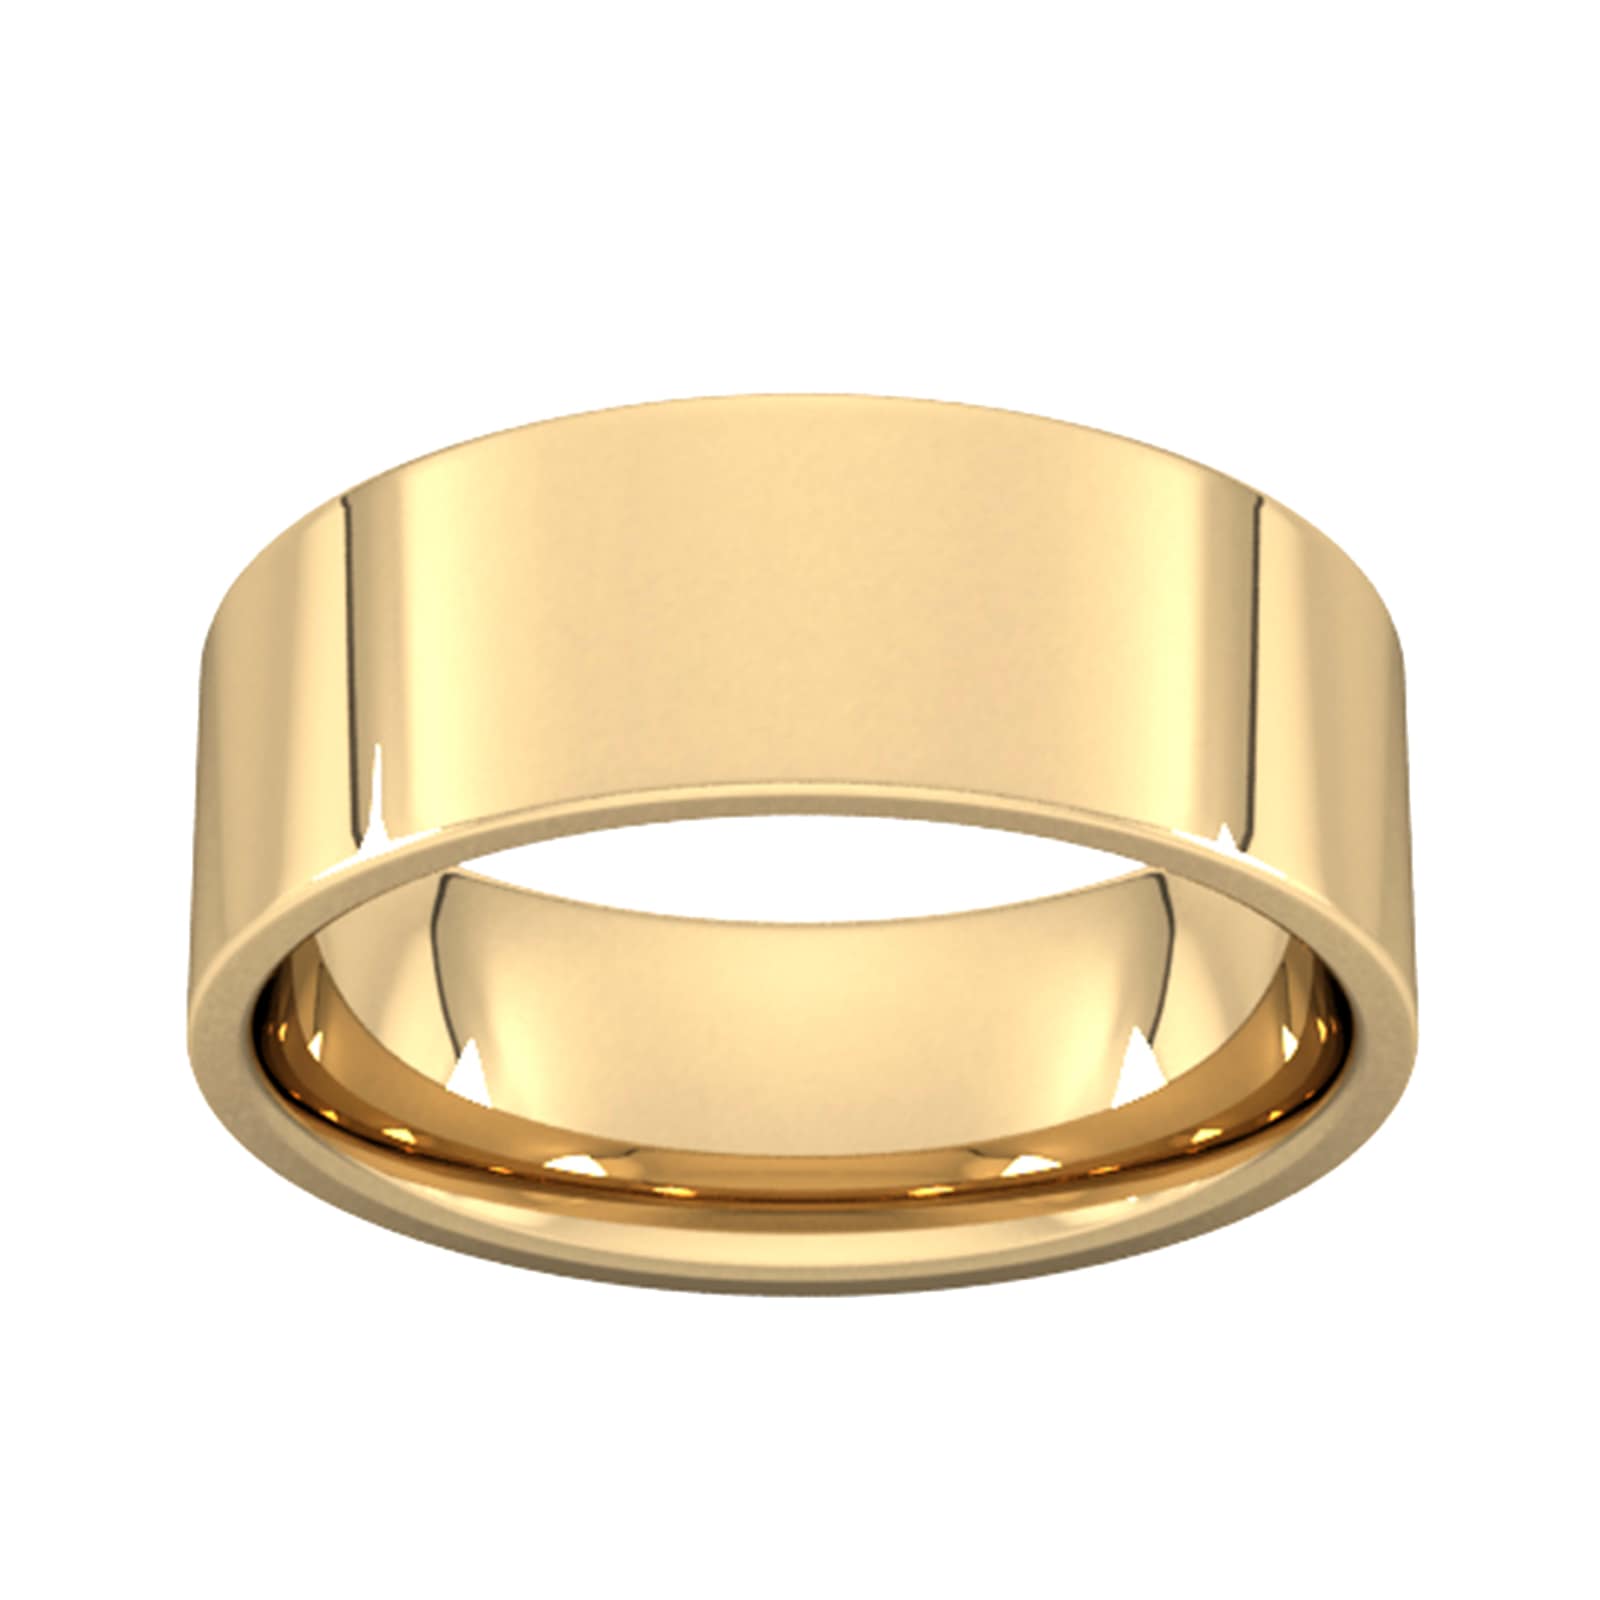 8mm Flat Court Heavy Wedding Ring In 9 Carat Yellow Gold - Ring Size L